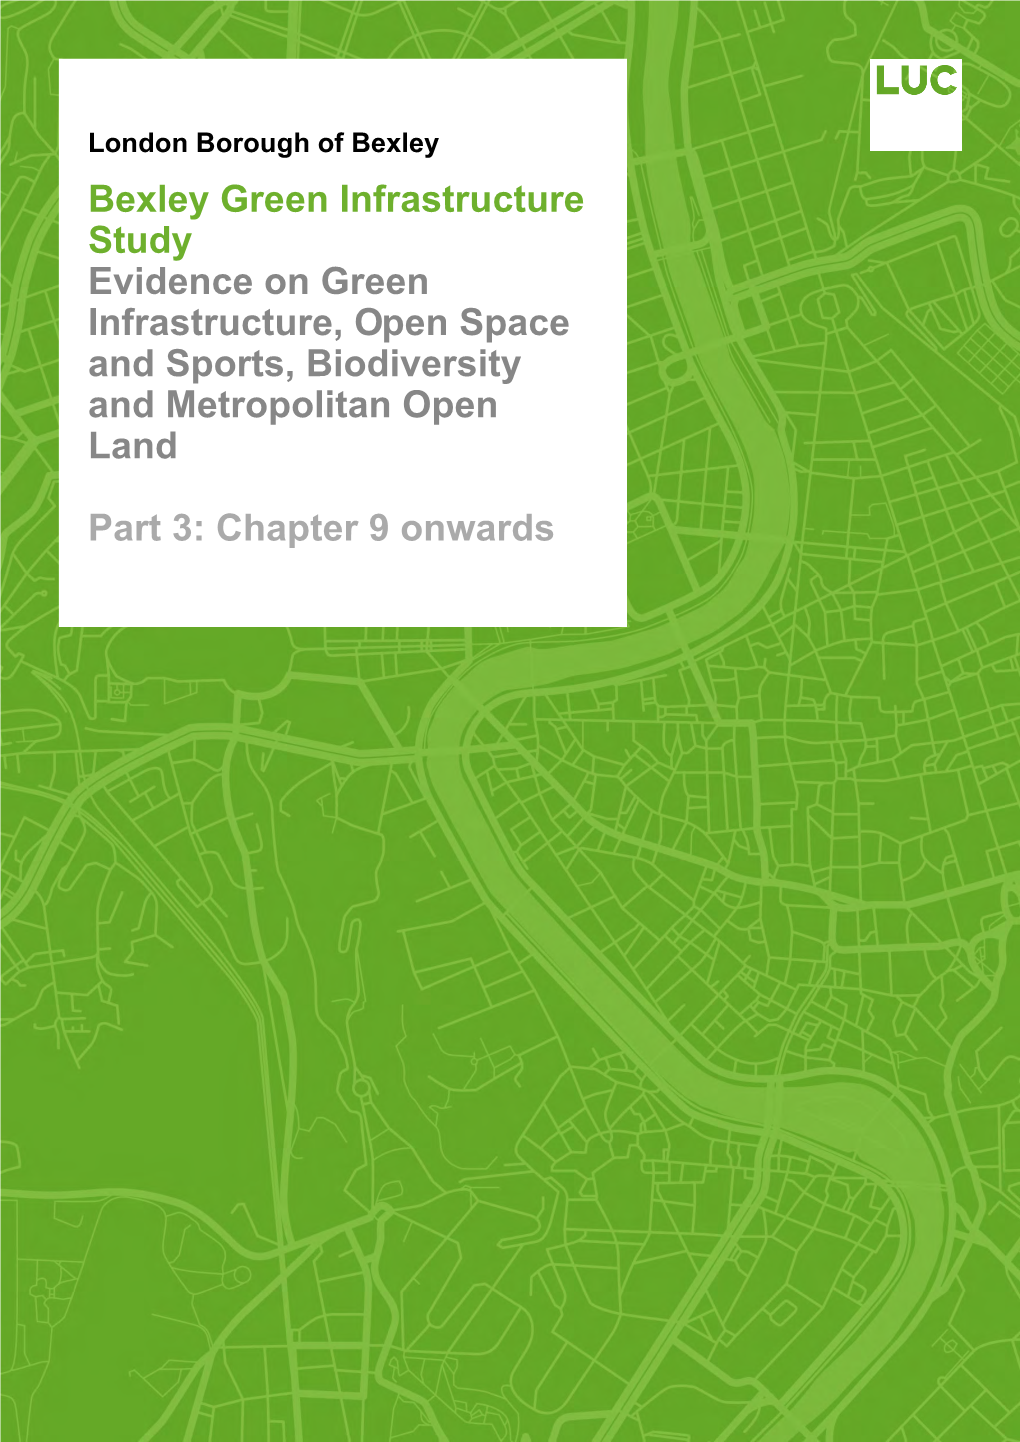 Green Infrastructure Study (April 2020)